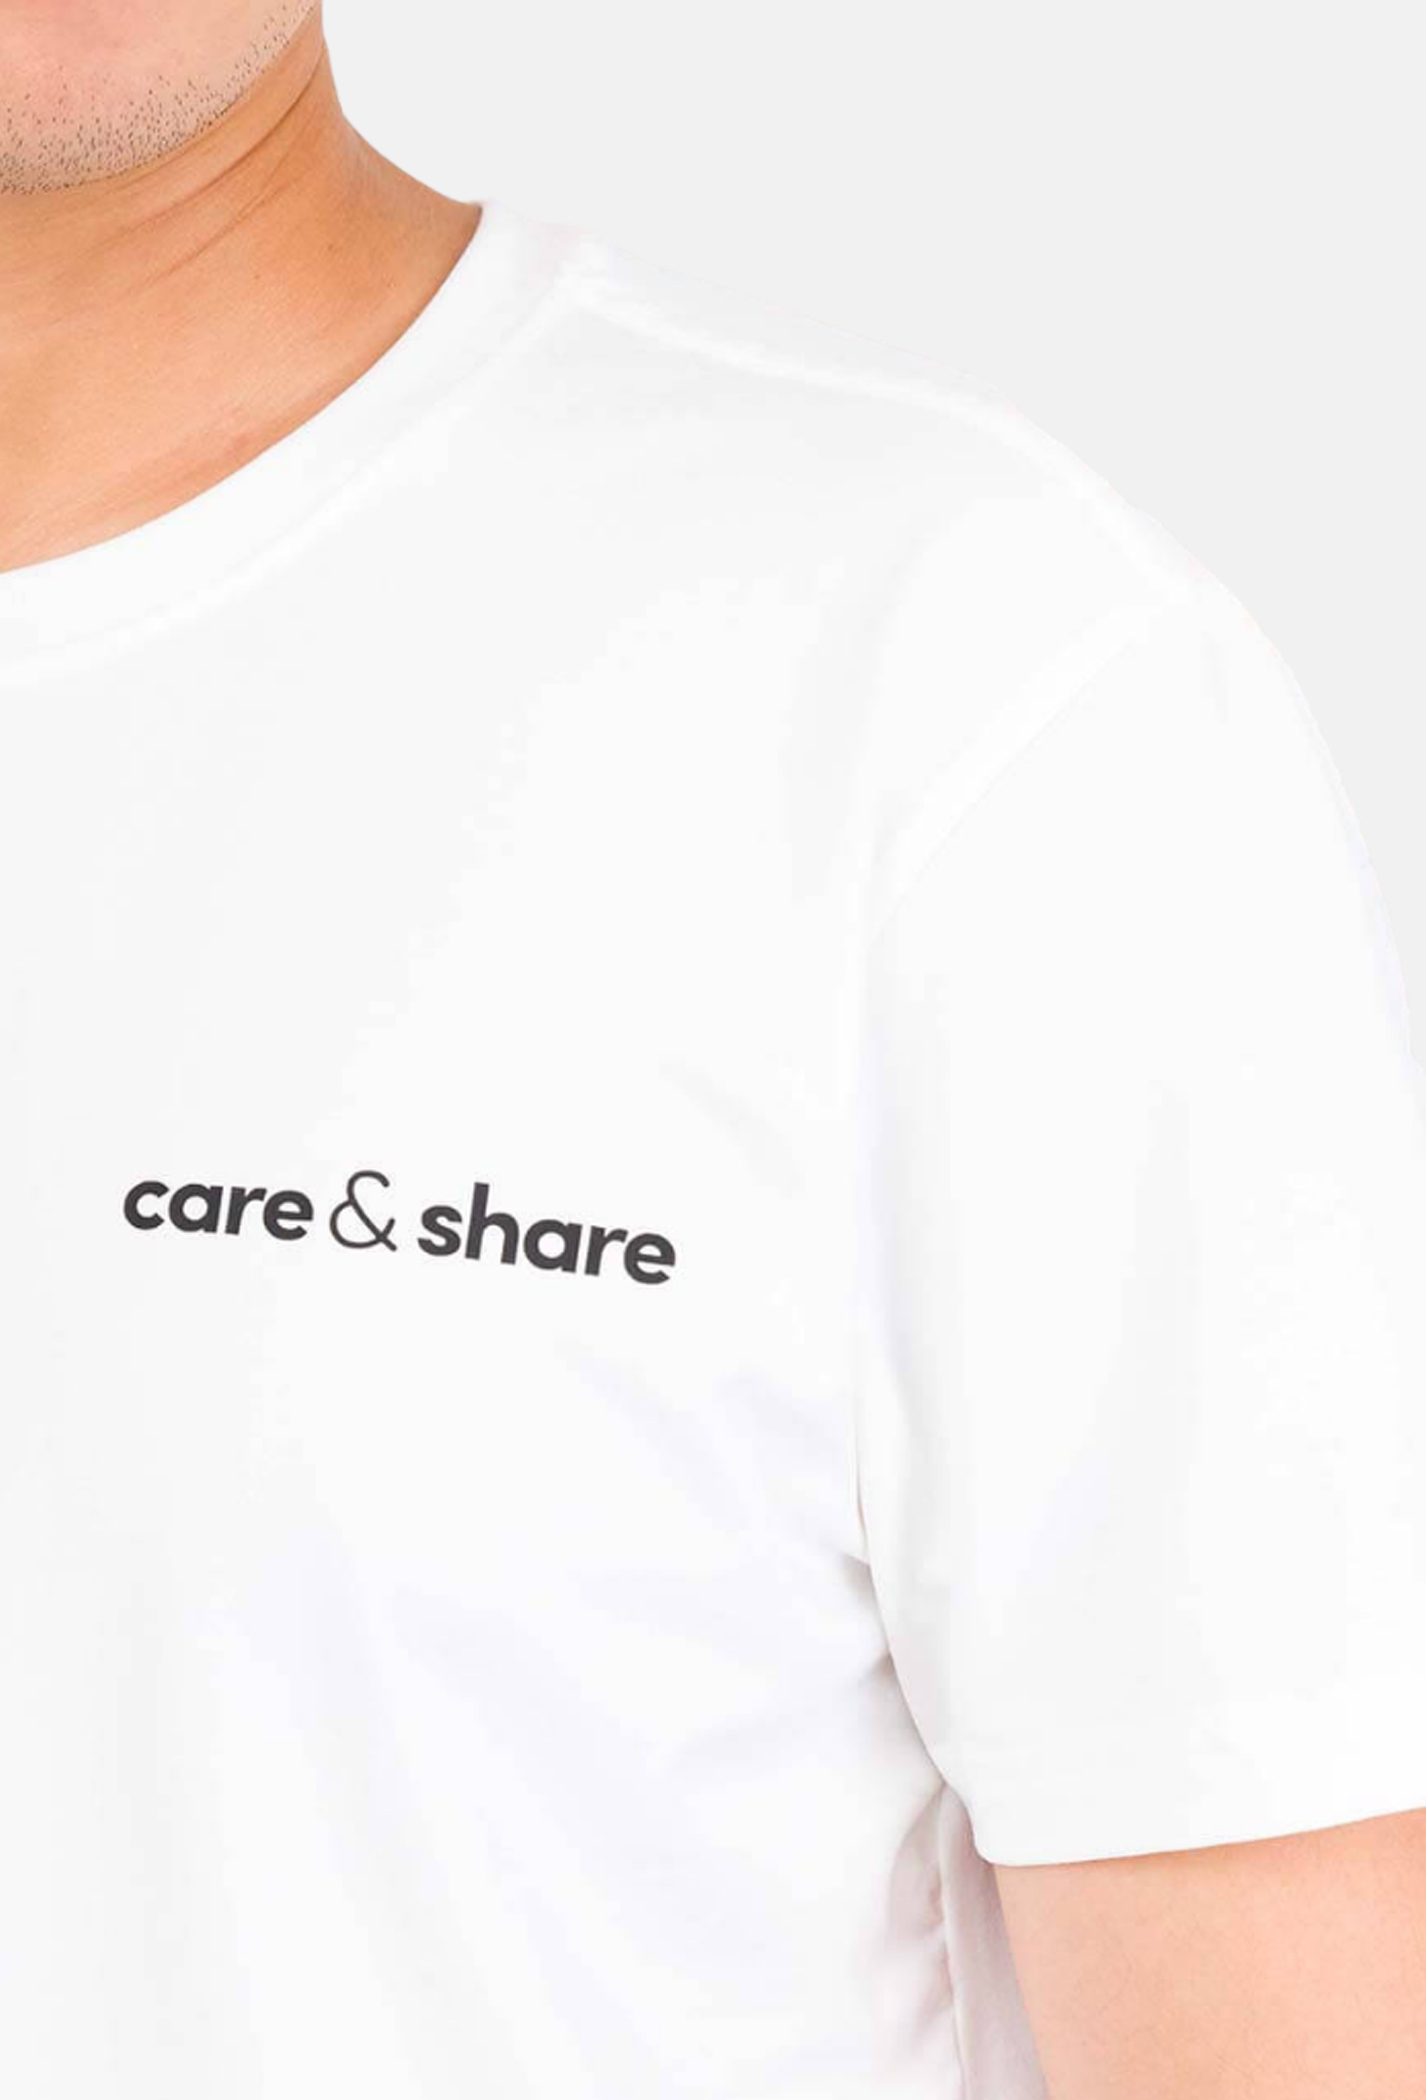 T-Shirt in Care & Share  2